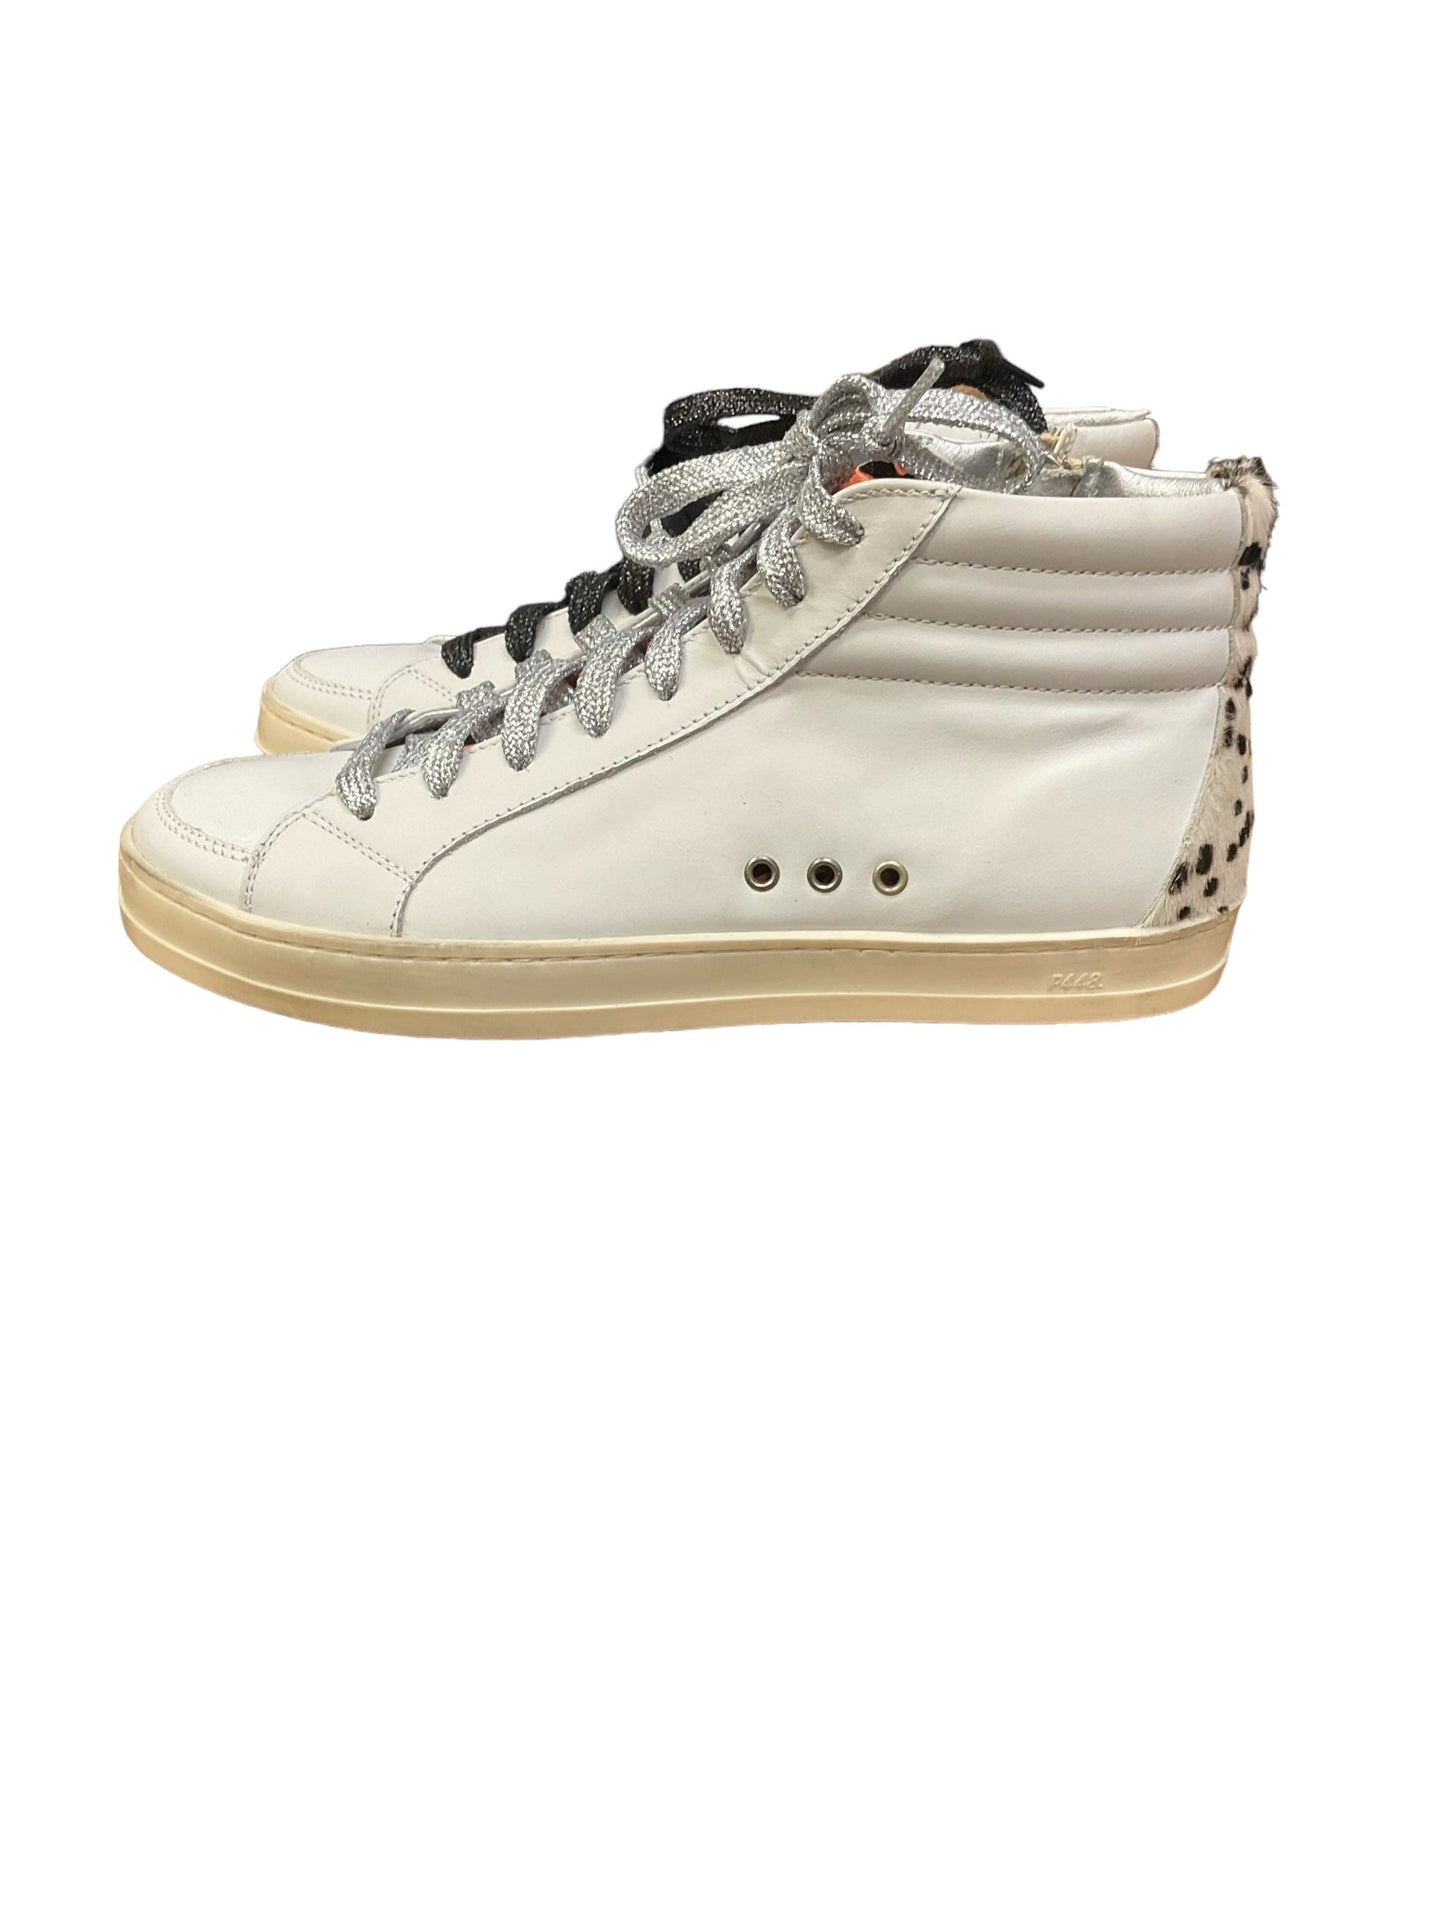 White Shoes Sneakers P448, Size 7